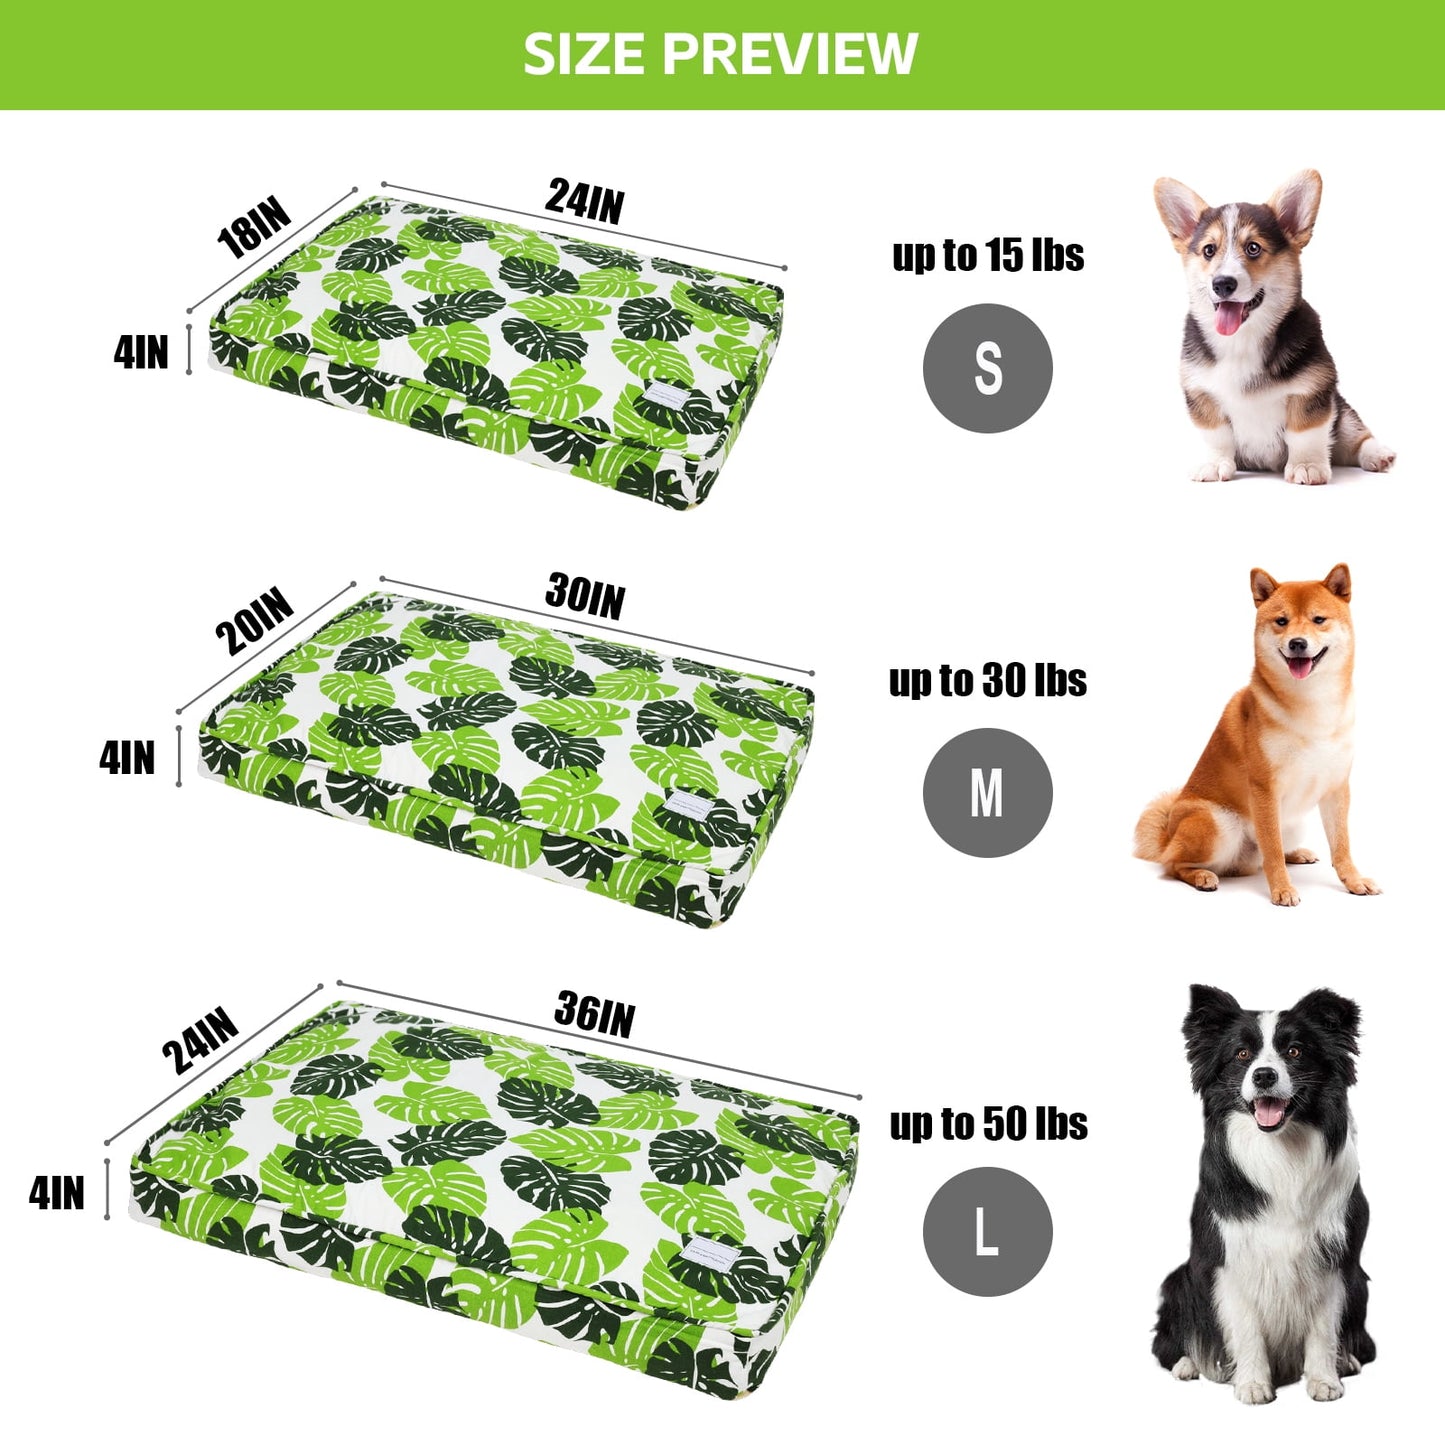 Exclusivo Mezcla Orthopedic Dog Bed for Small Dogs, Shredded Memory Foam Supportive Therapy Fillings Pet Bed, Soft Warm Washable Cat Cuddler Bed, Monstera Leaf 24''x18''